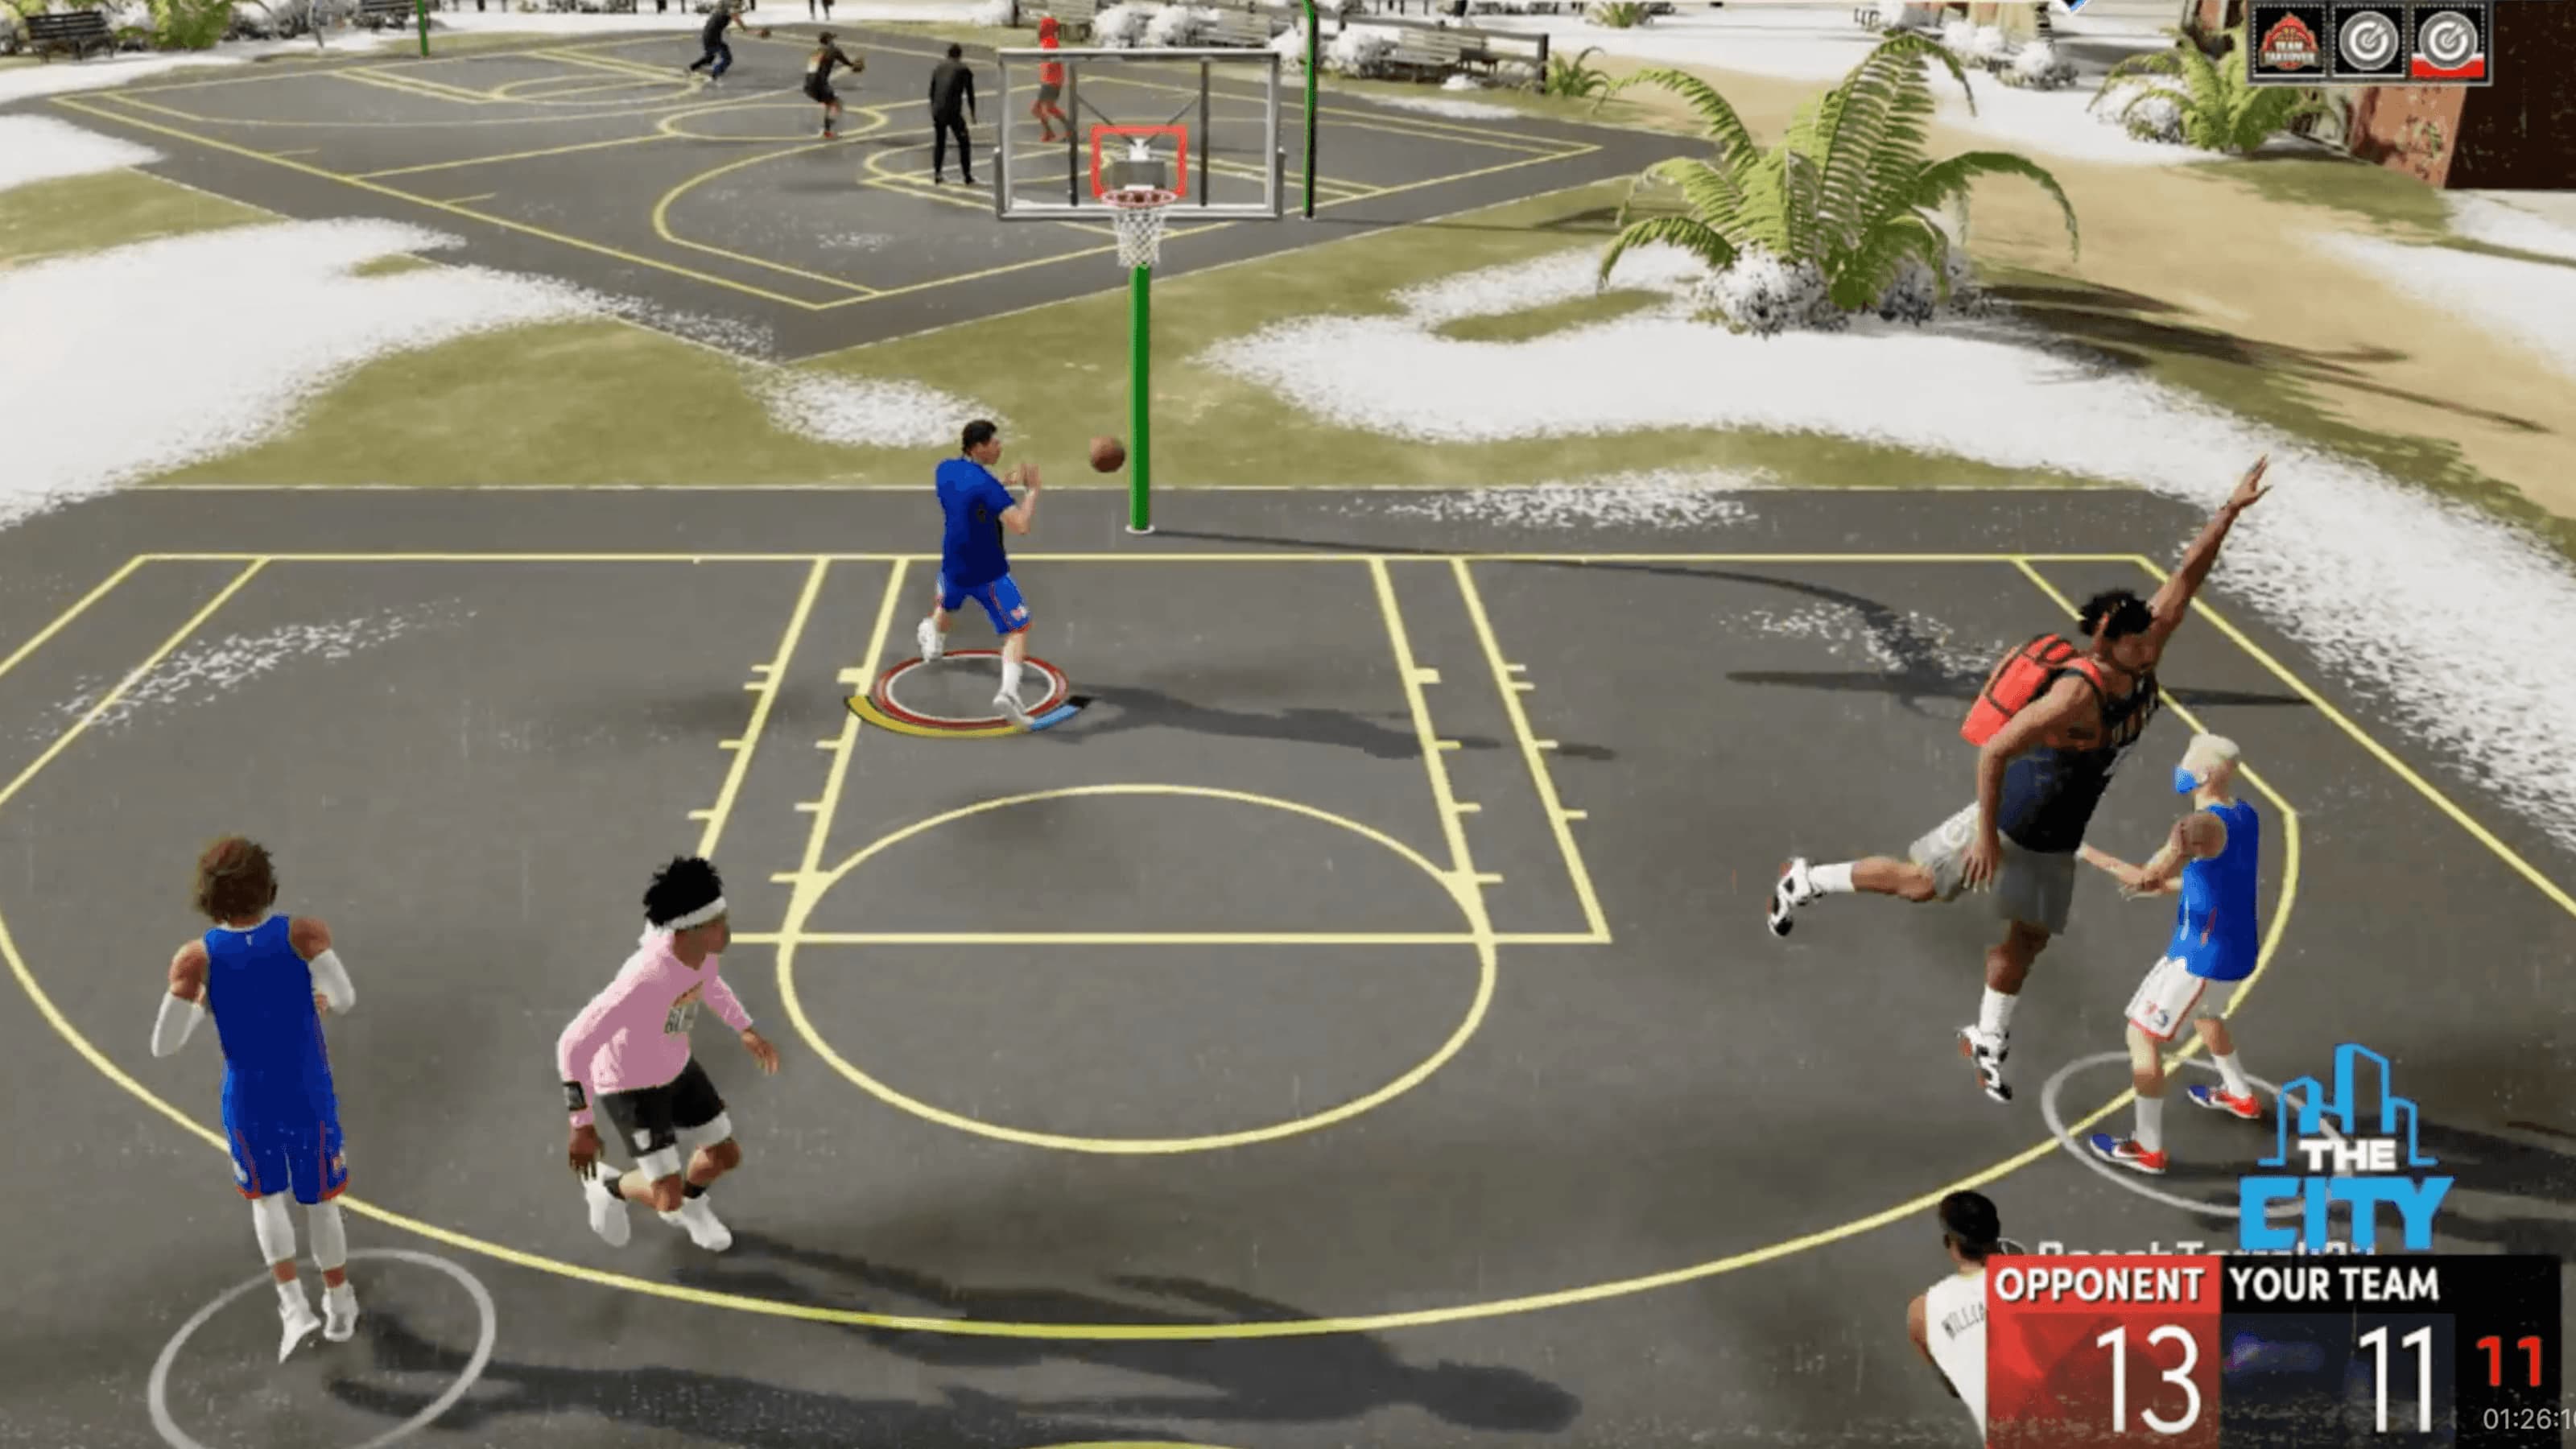 SJU and the 76ers Gaming Club Team Up in NBA 2K Livestream